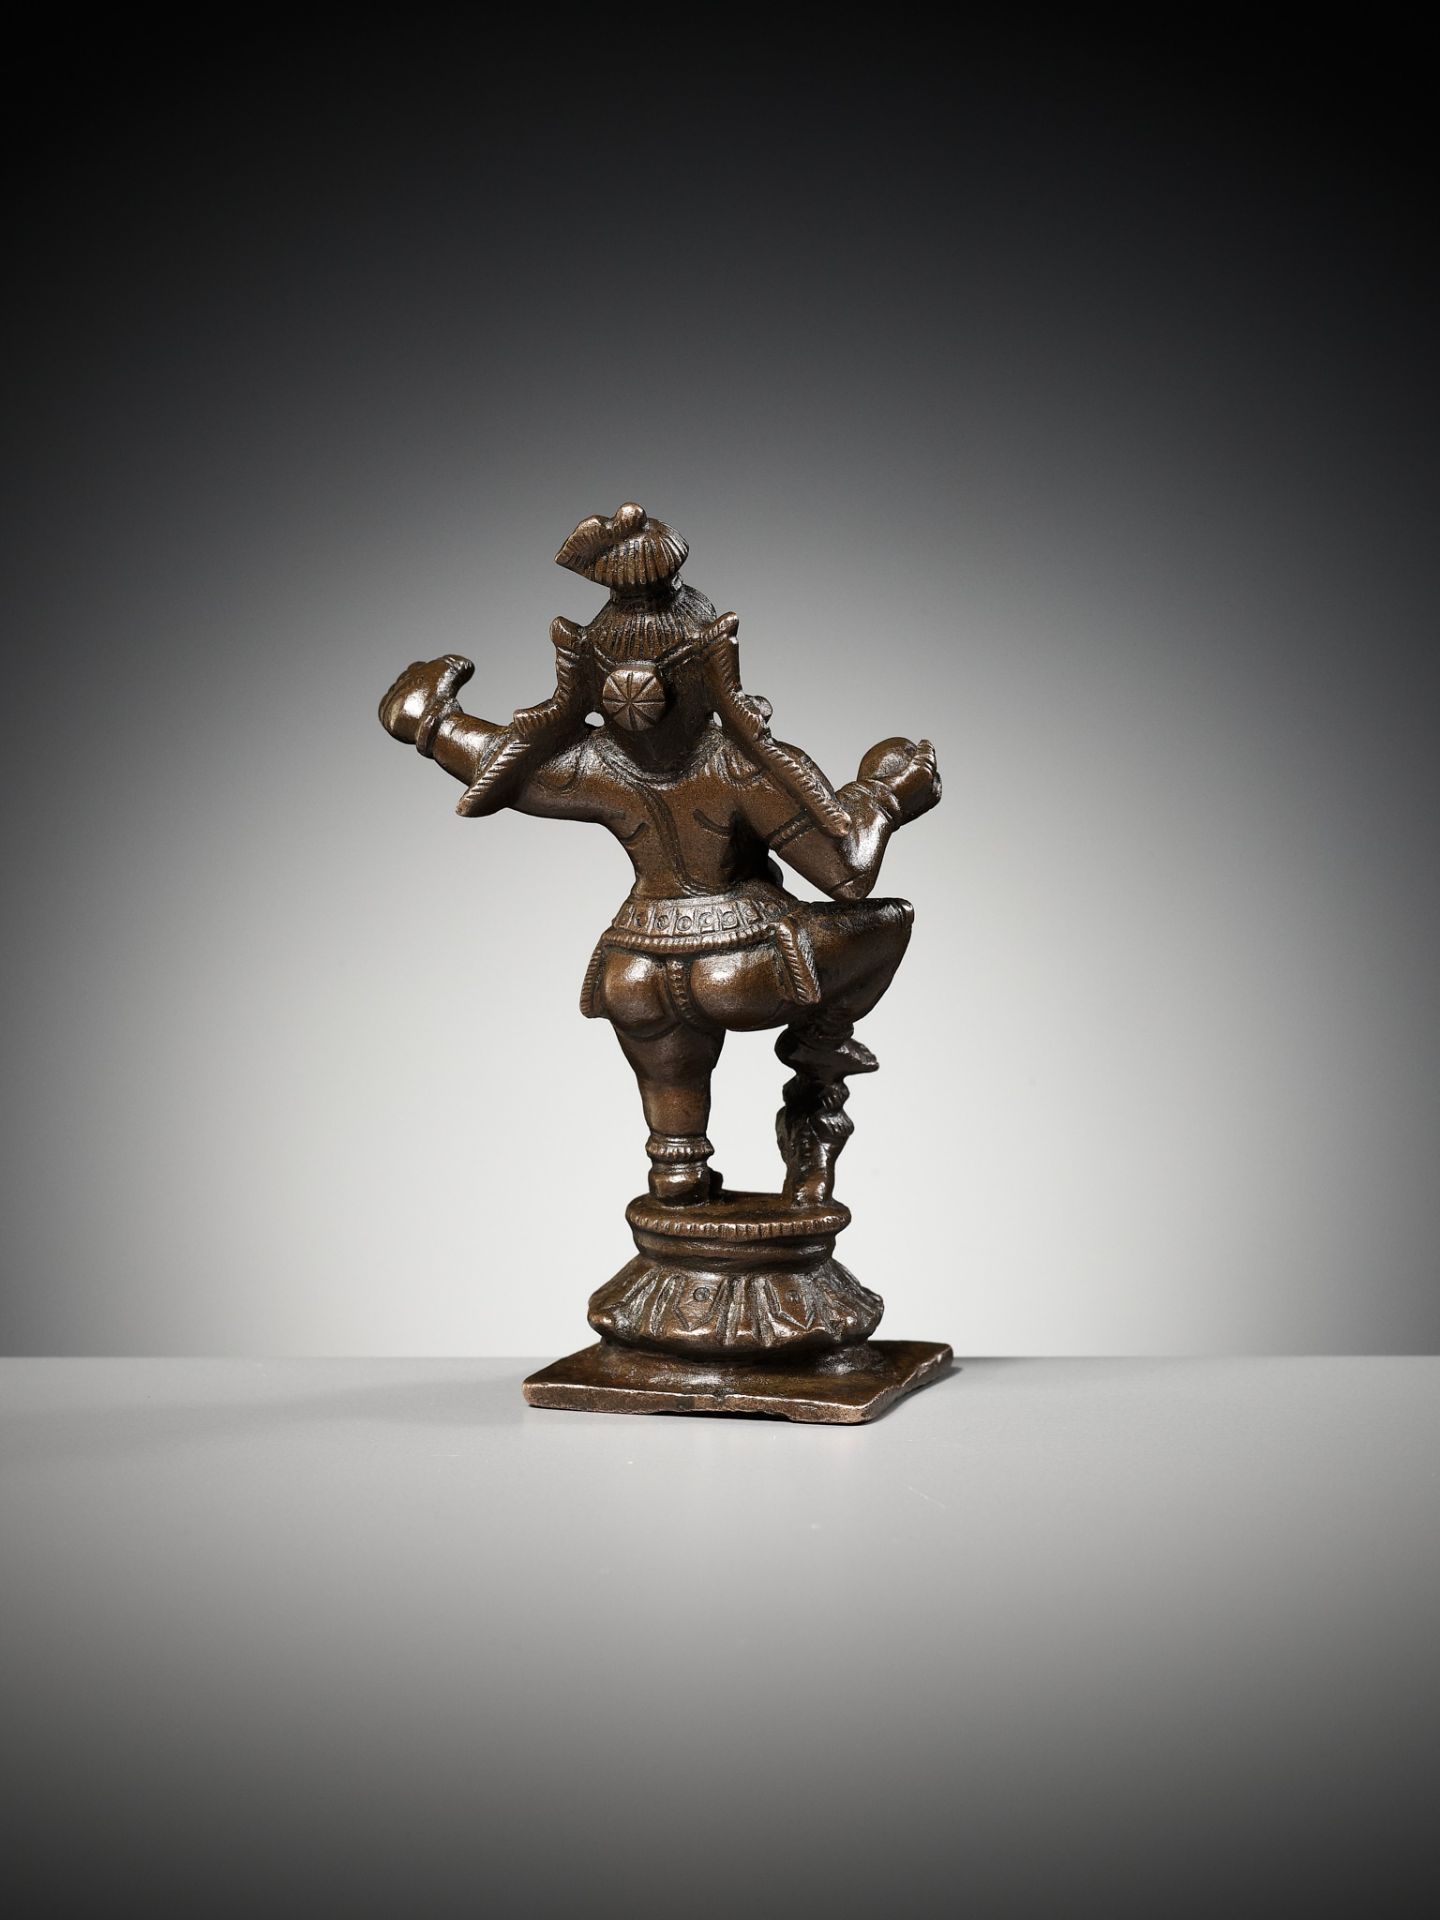 A COPPER ALLOY FIGURE OF DANCING KRISHNA, SOUTH INDIA, 17TH-18TH CENTURY - Image 8 of 13